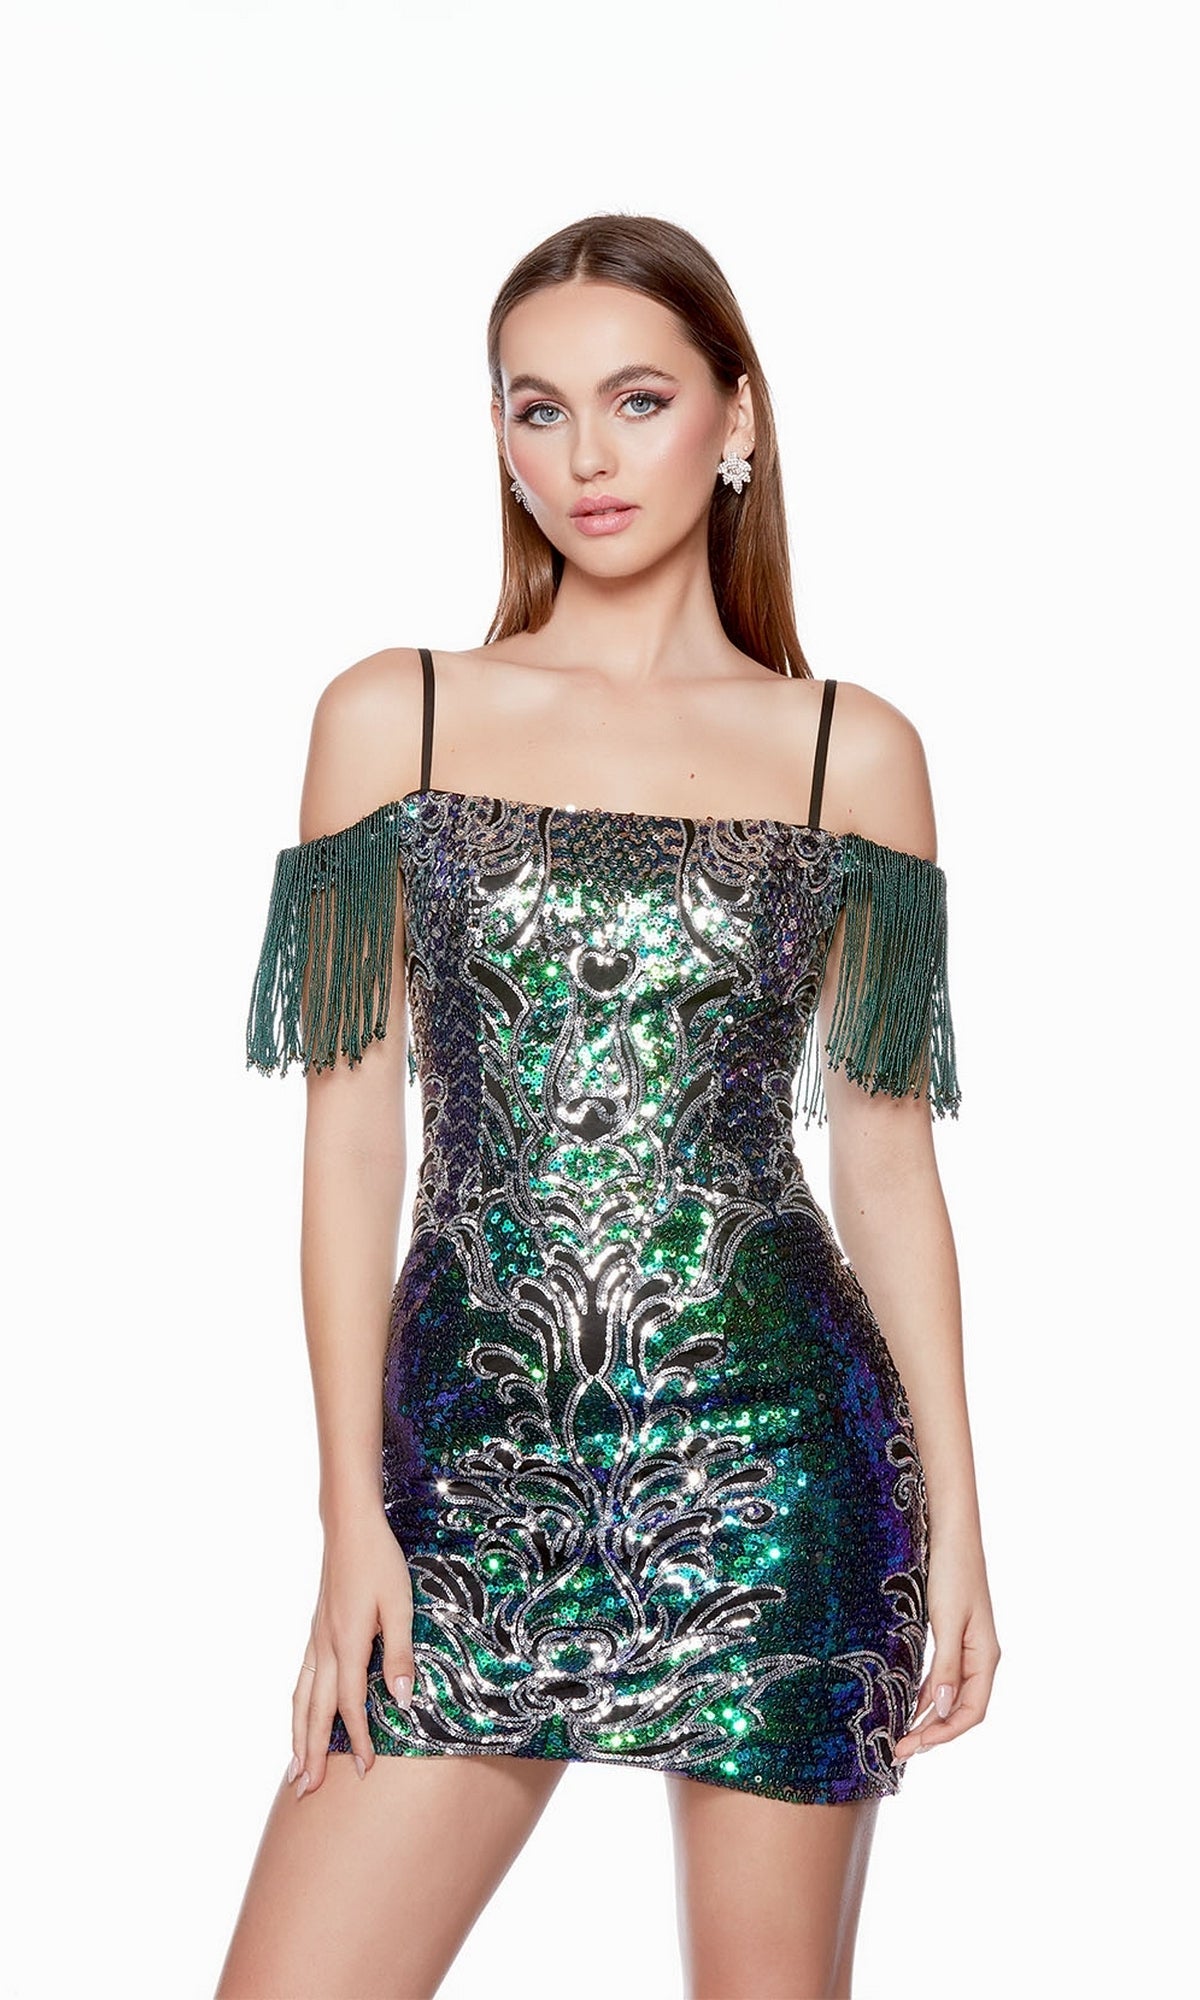 Chameleon Short Dress By Alyce For Homecoming 4636